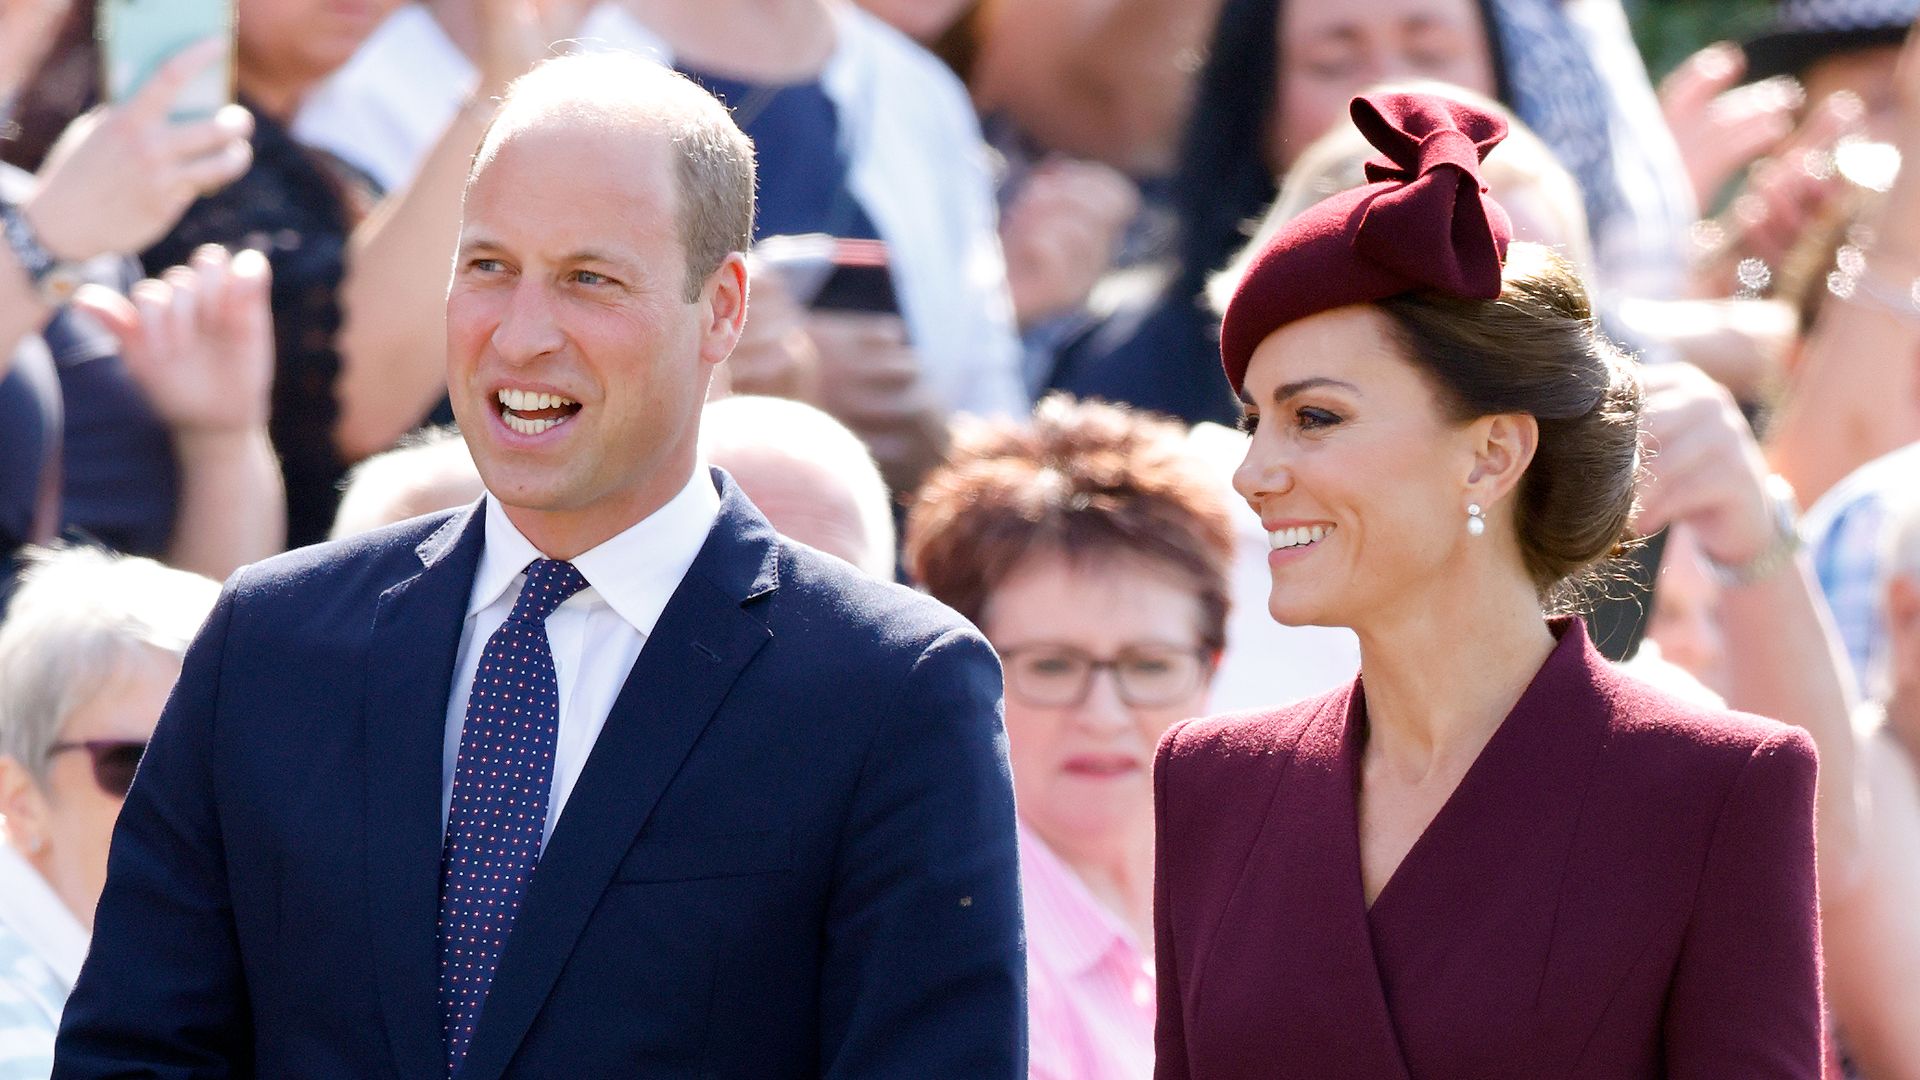 Prince William in a suit and Kate Middleton in a burgundy dress